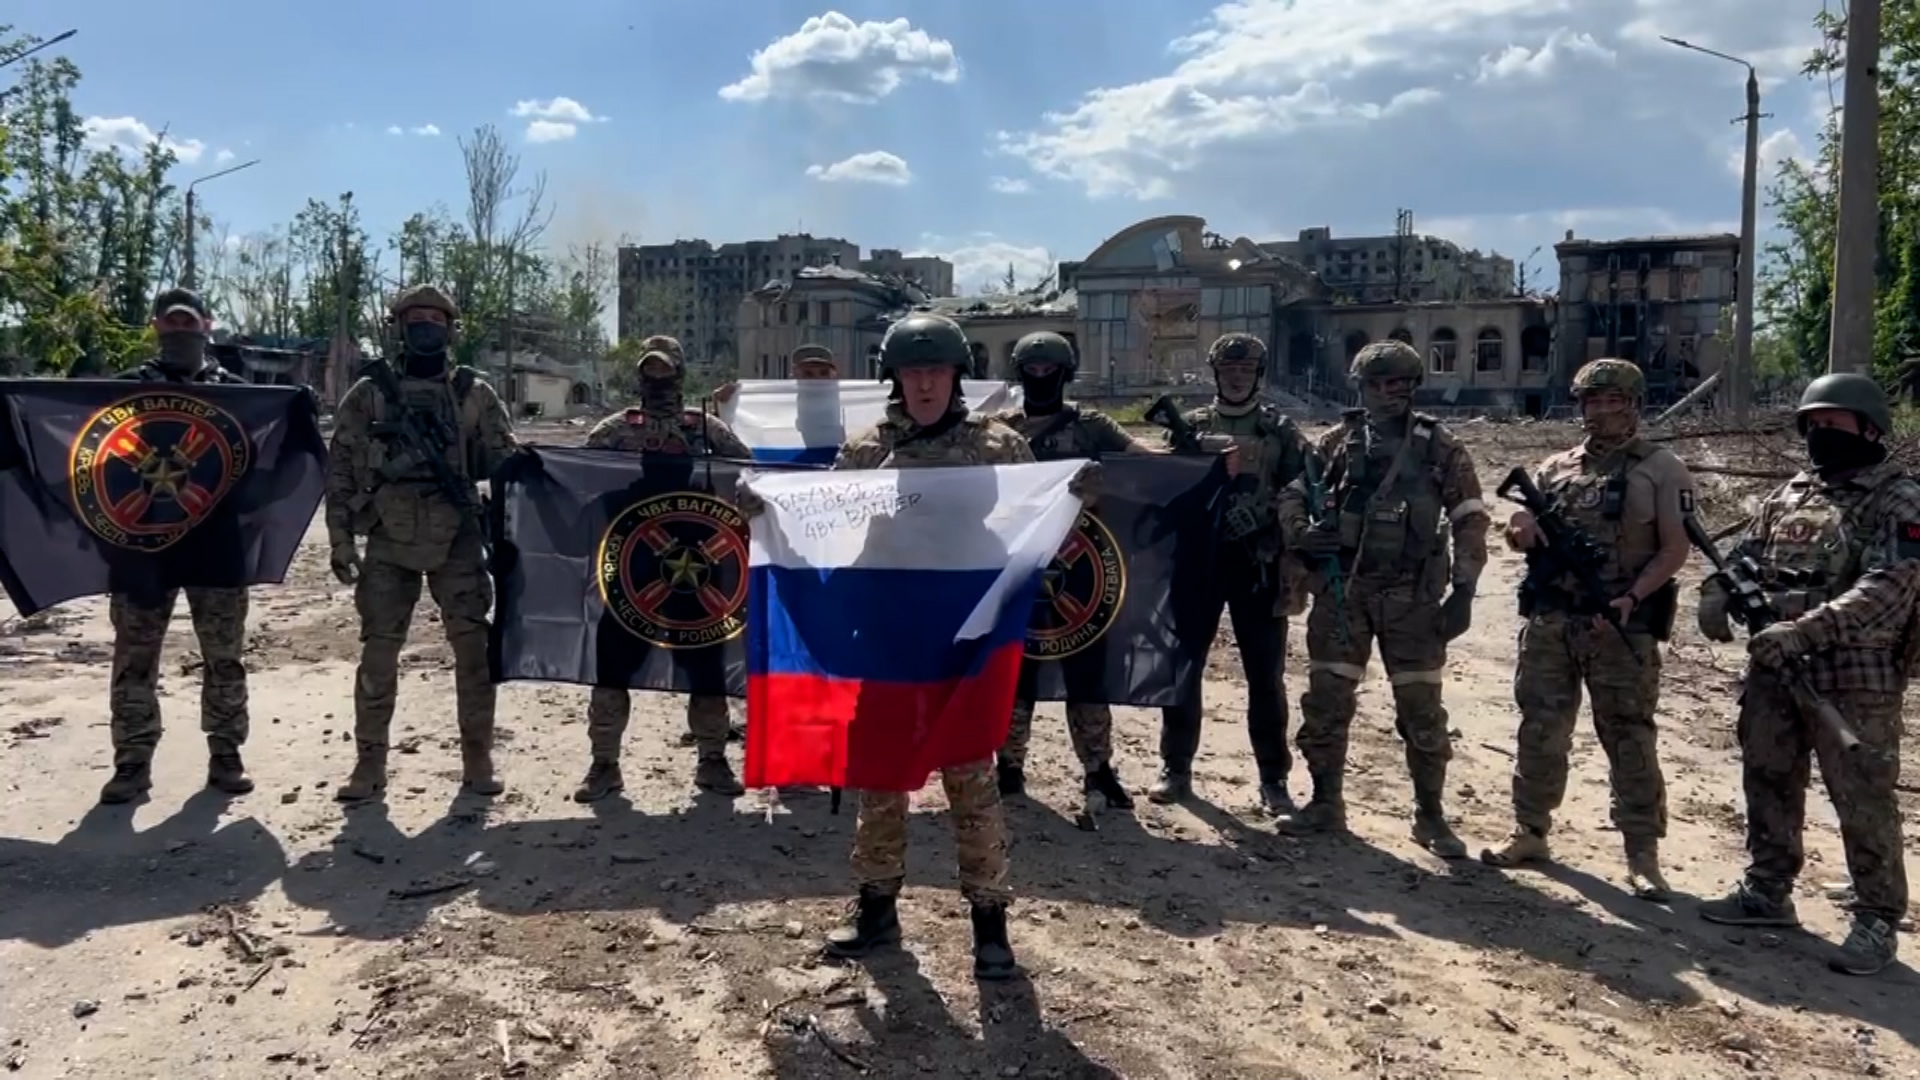 Yevgeny Prigozhin, the head of the Wagner private military group, holds a Russian flag in this image from a video released on May 20. 